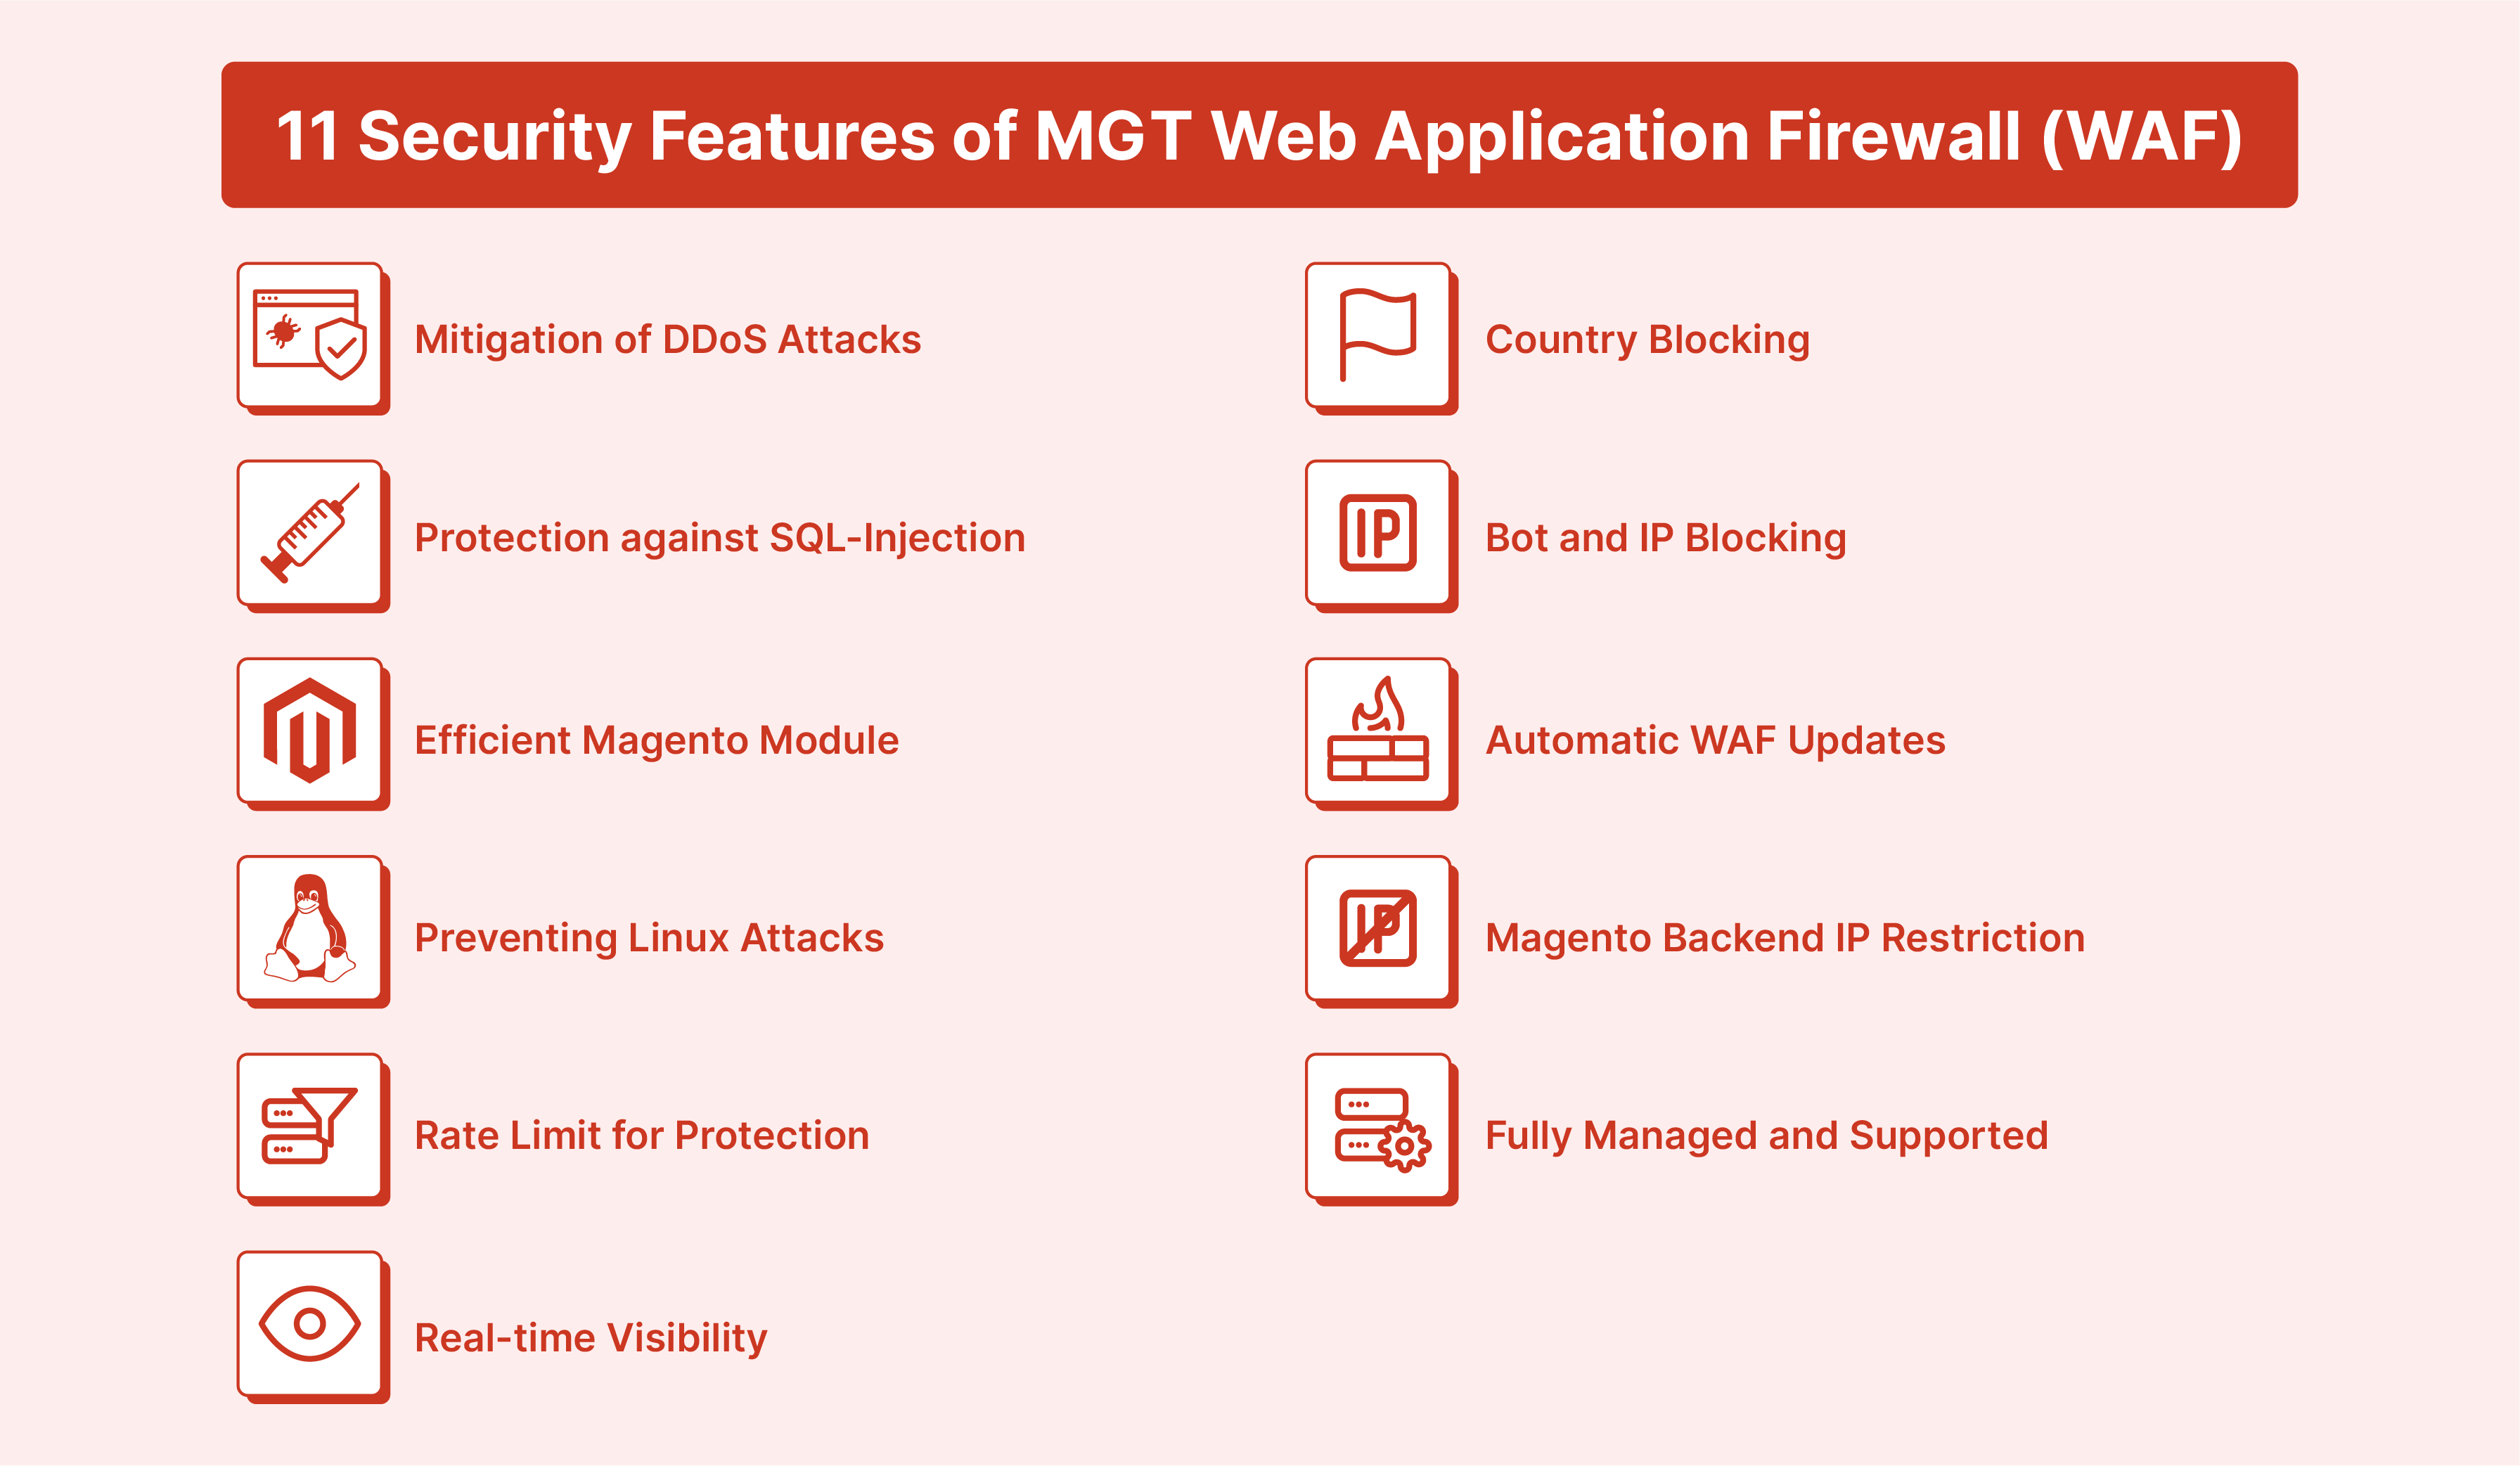 11 Security Features of MGT Web Application Firewall (WAF)